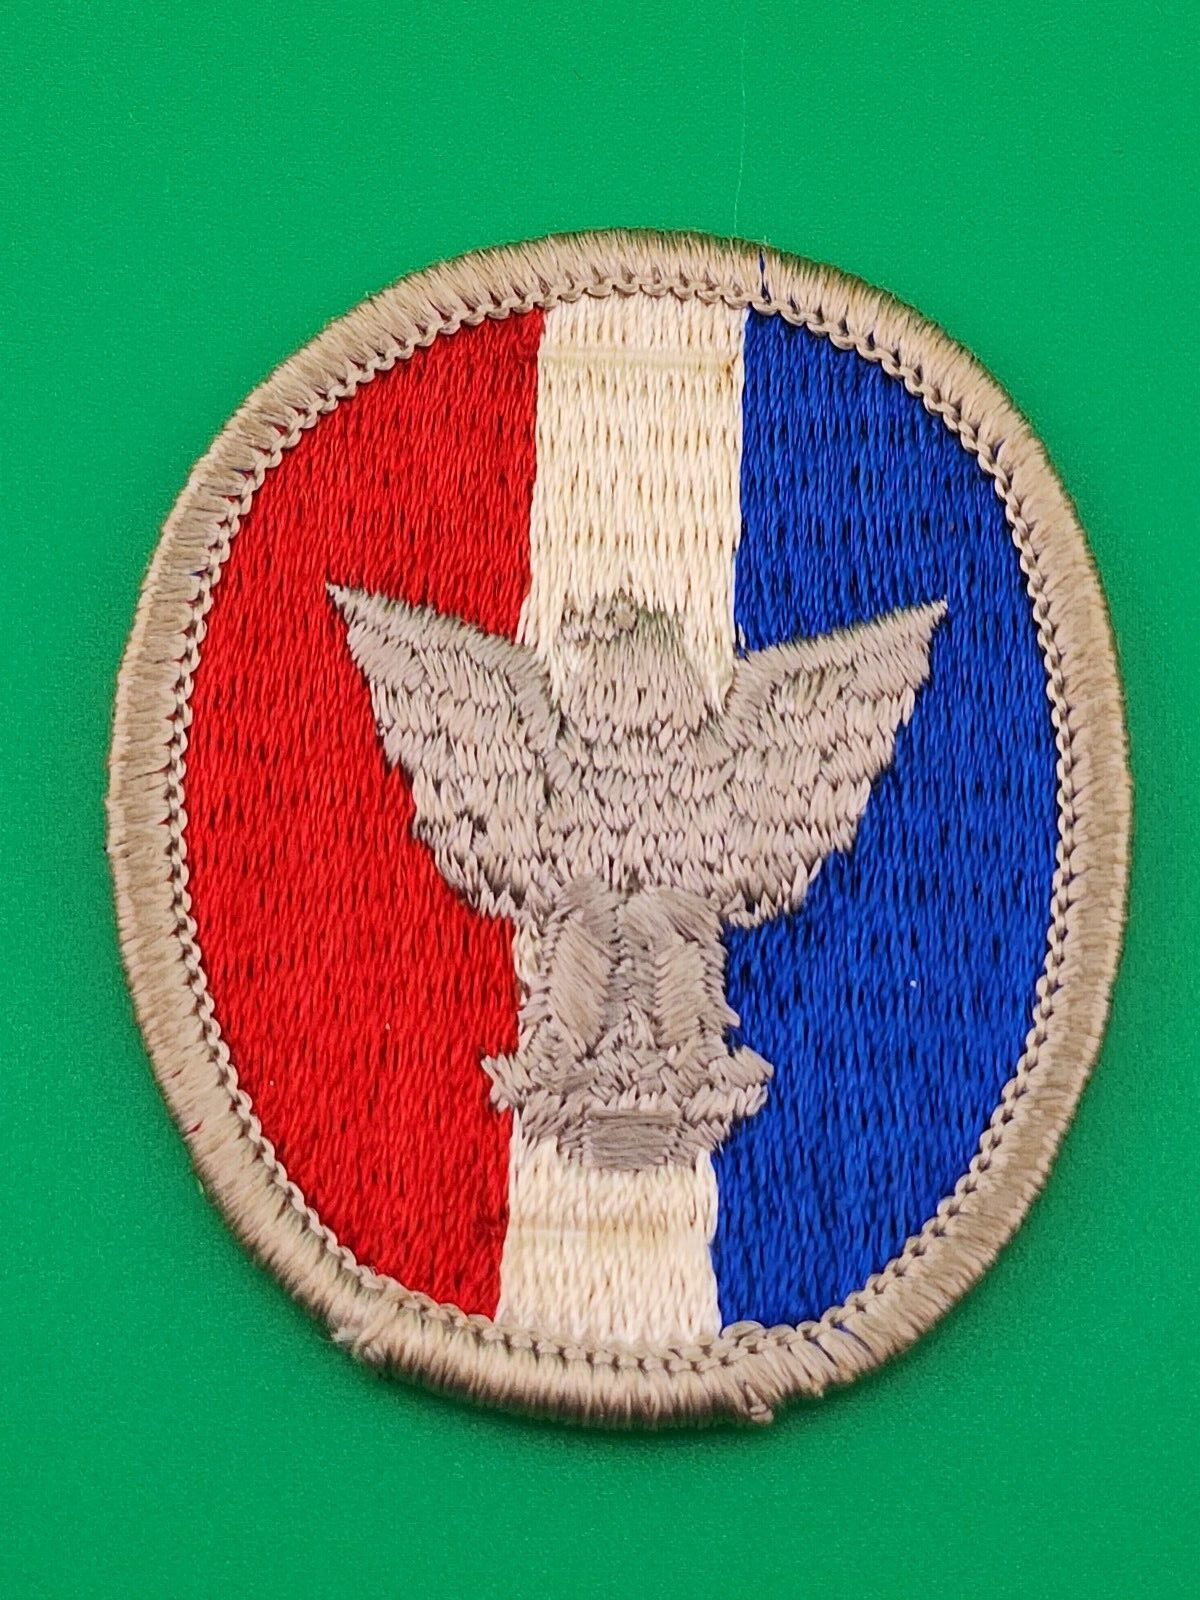 Eagle Scout Rank Uniform Patch BSA Boy Scouts Of America Type 4 NEW